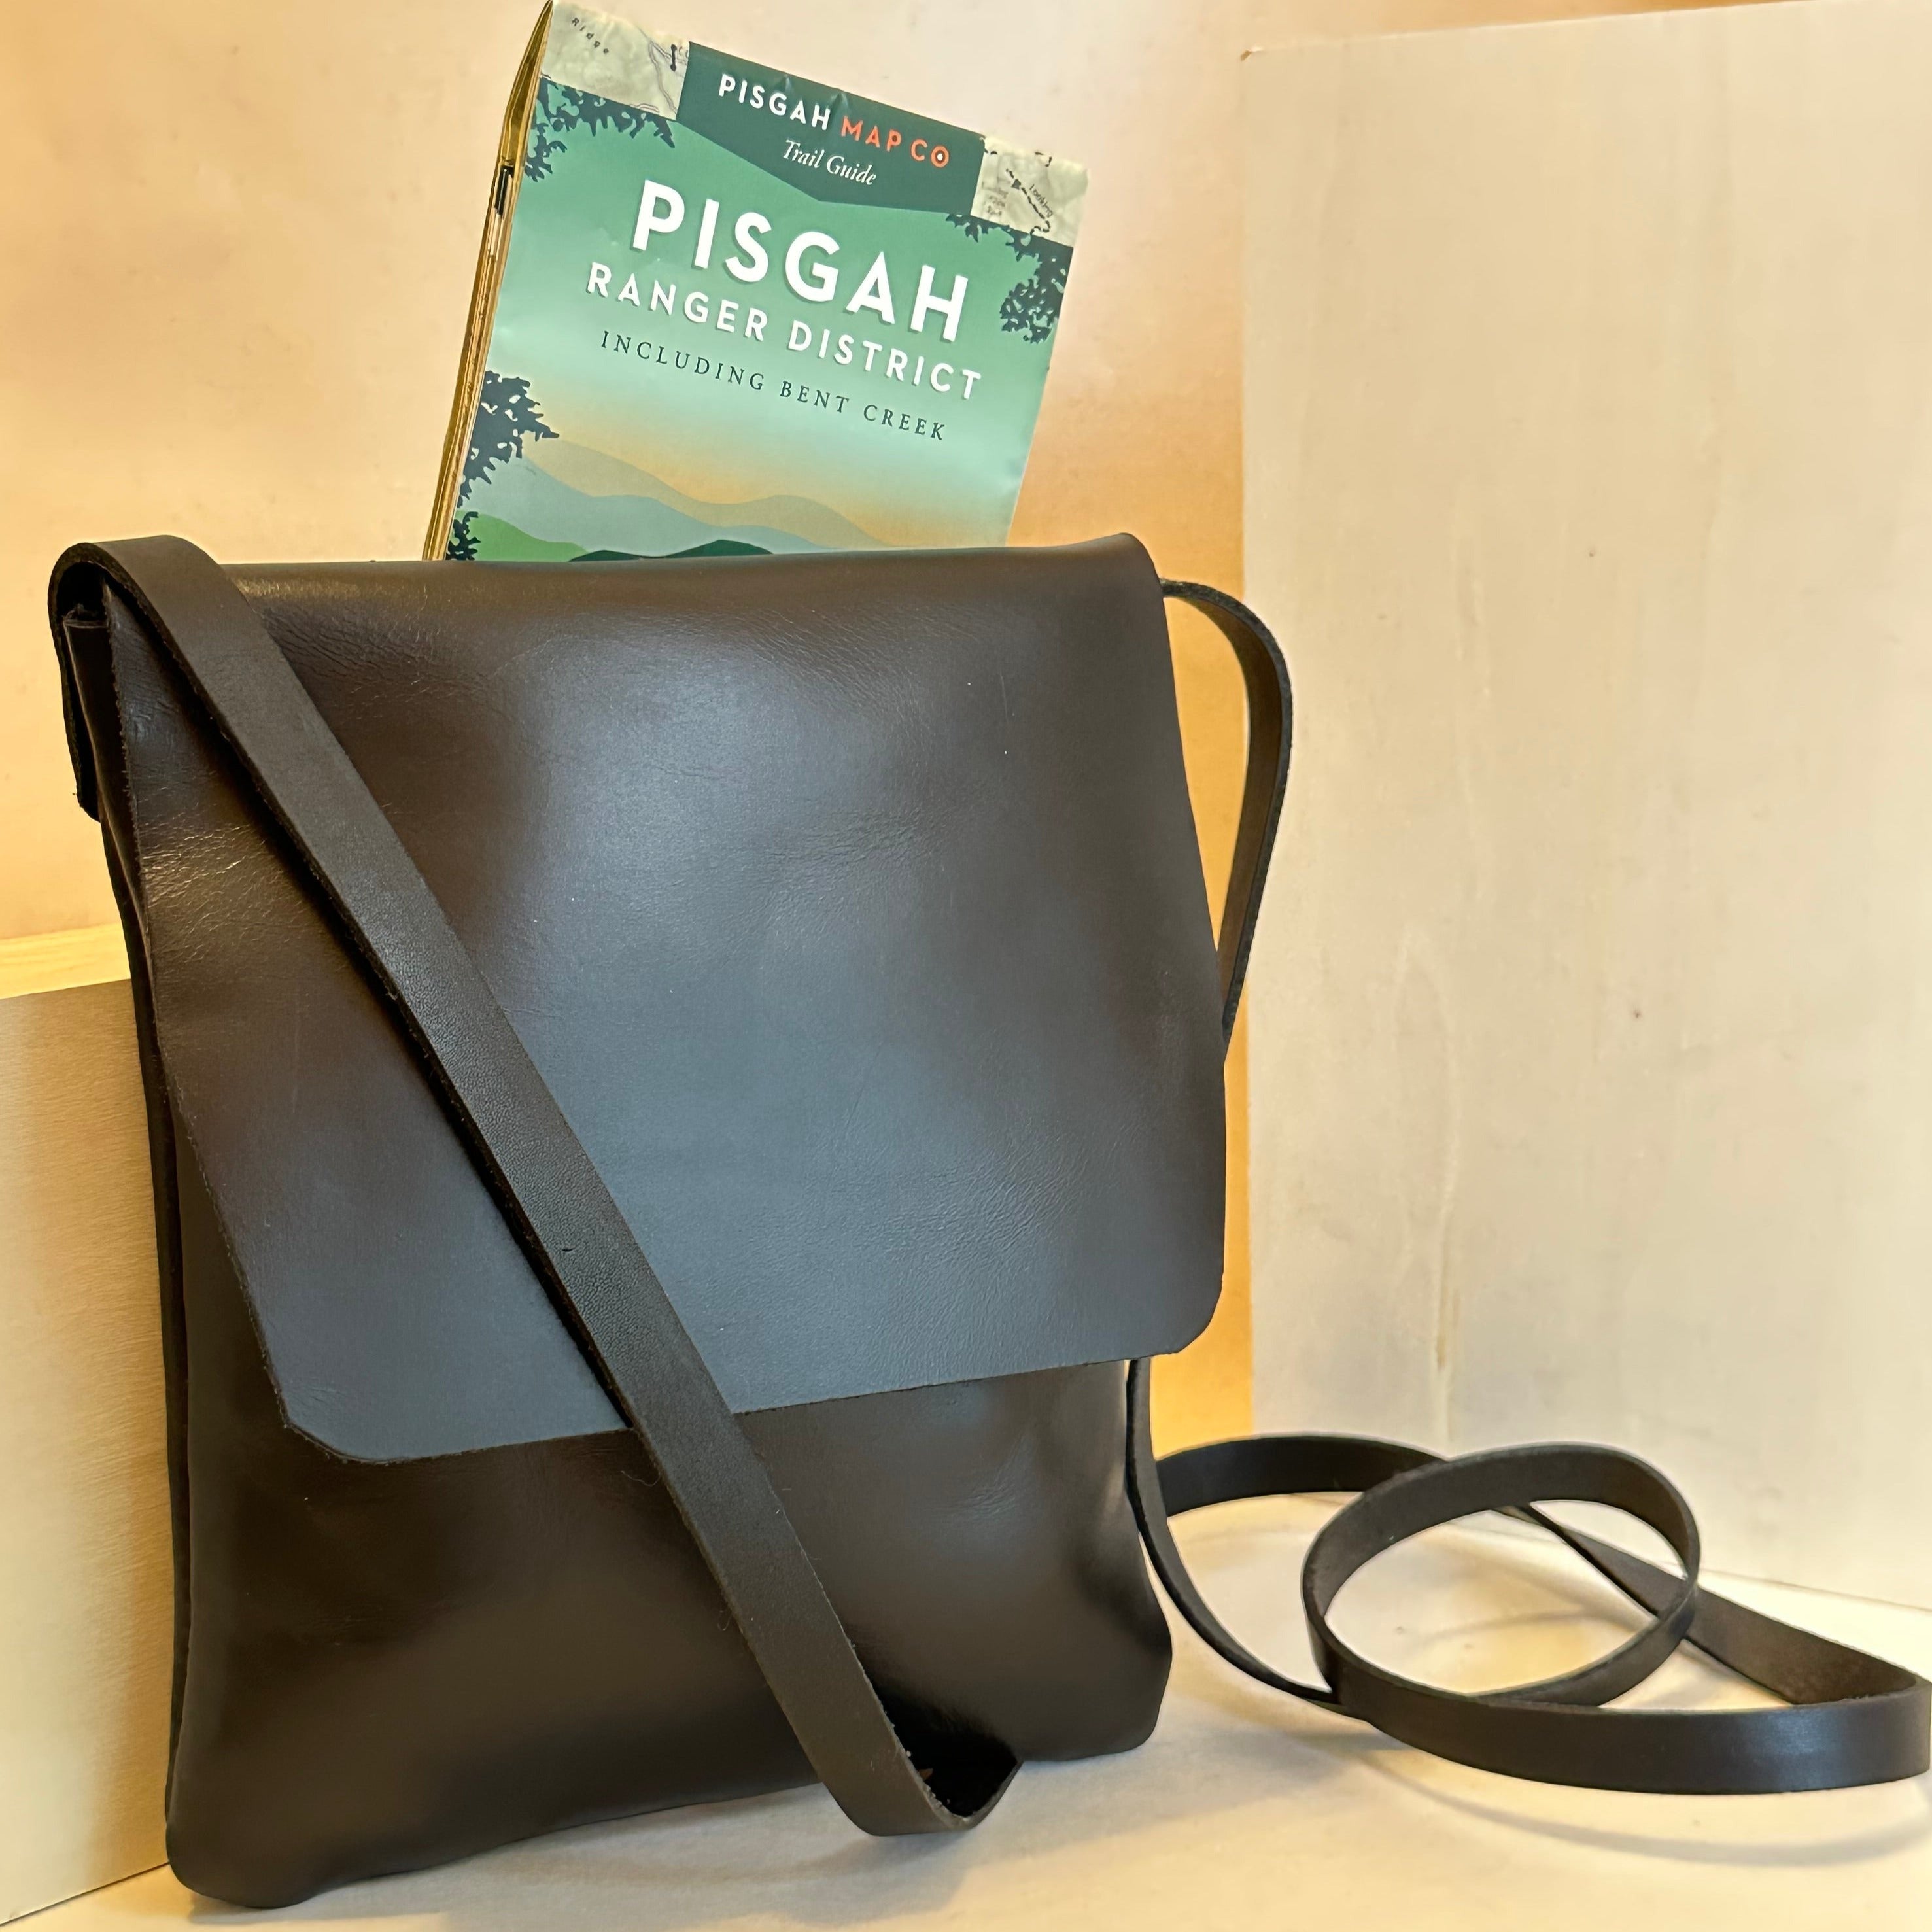 Shining Rock Goods Essential Black cross body handbag- small and compact with plenty of room to carry your essentials perfect little treat for yourself or as a gift.